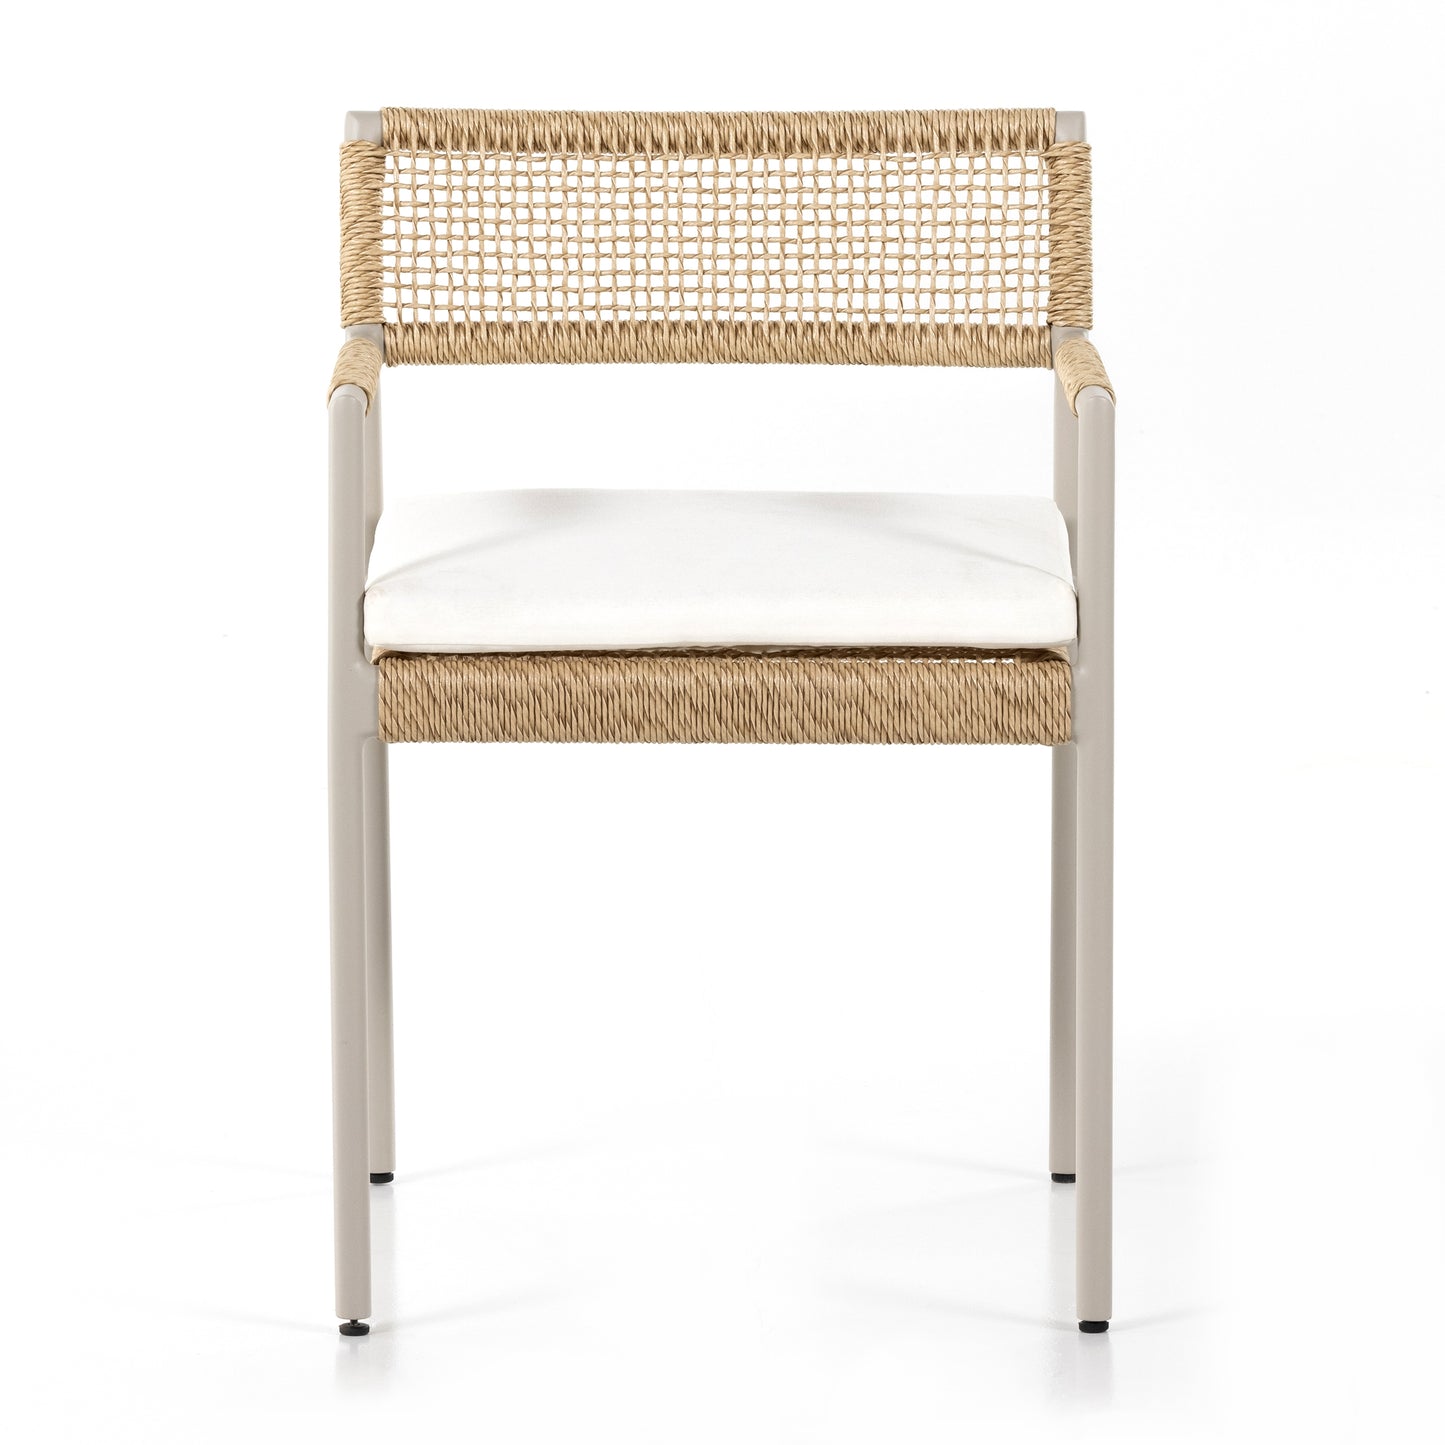 Niles Outdoor Dining Armchair - Natural Outdoor Chairs Four Hands     Four Hands, Mid Century Modern Furniture, Old Bones Furniture Company, Old Bones Co, Modern Mid Century, Designer Furniture, https://www.oldbonesco.com/